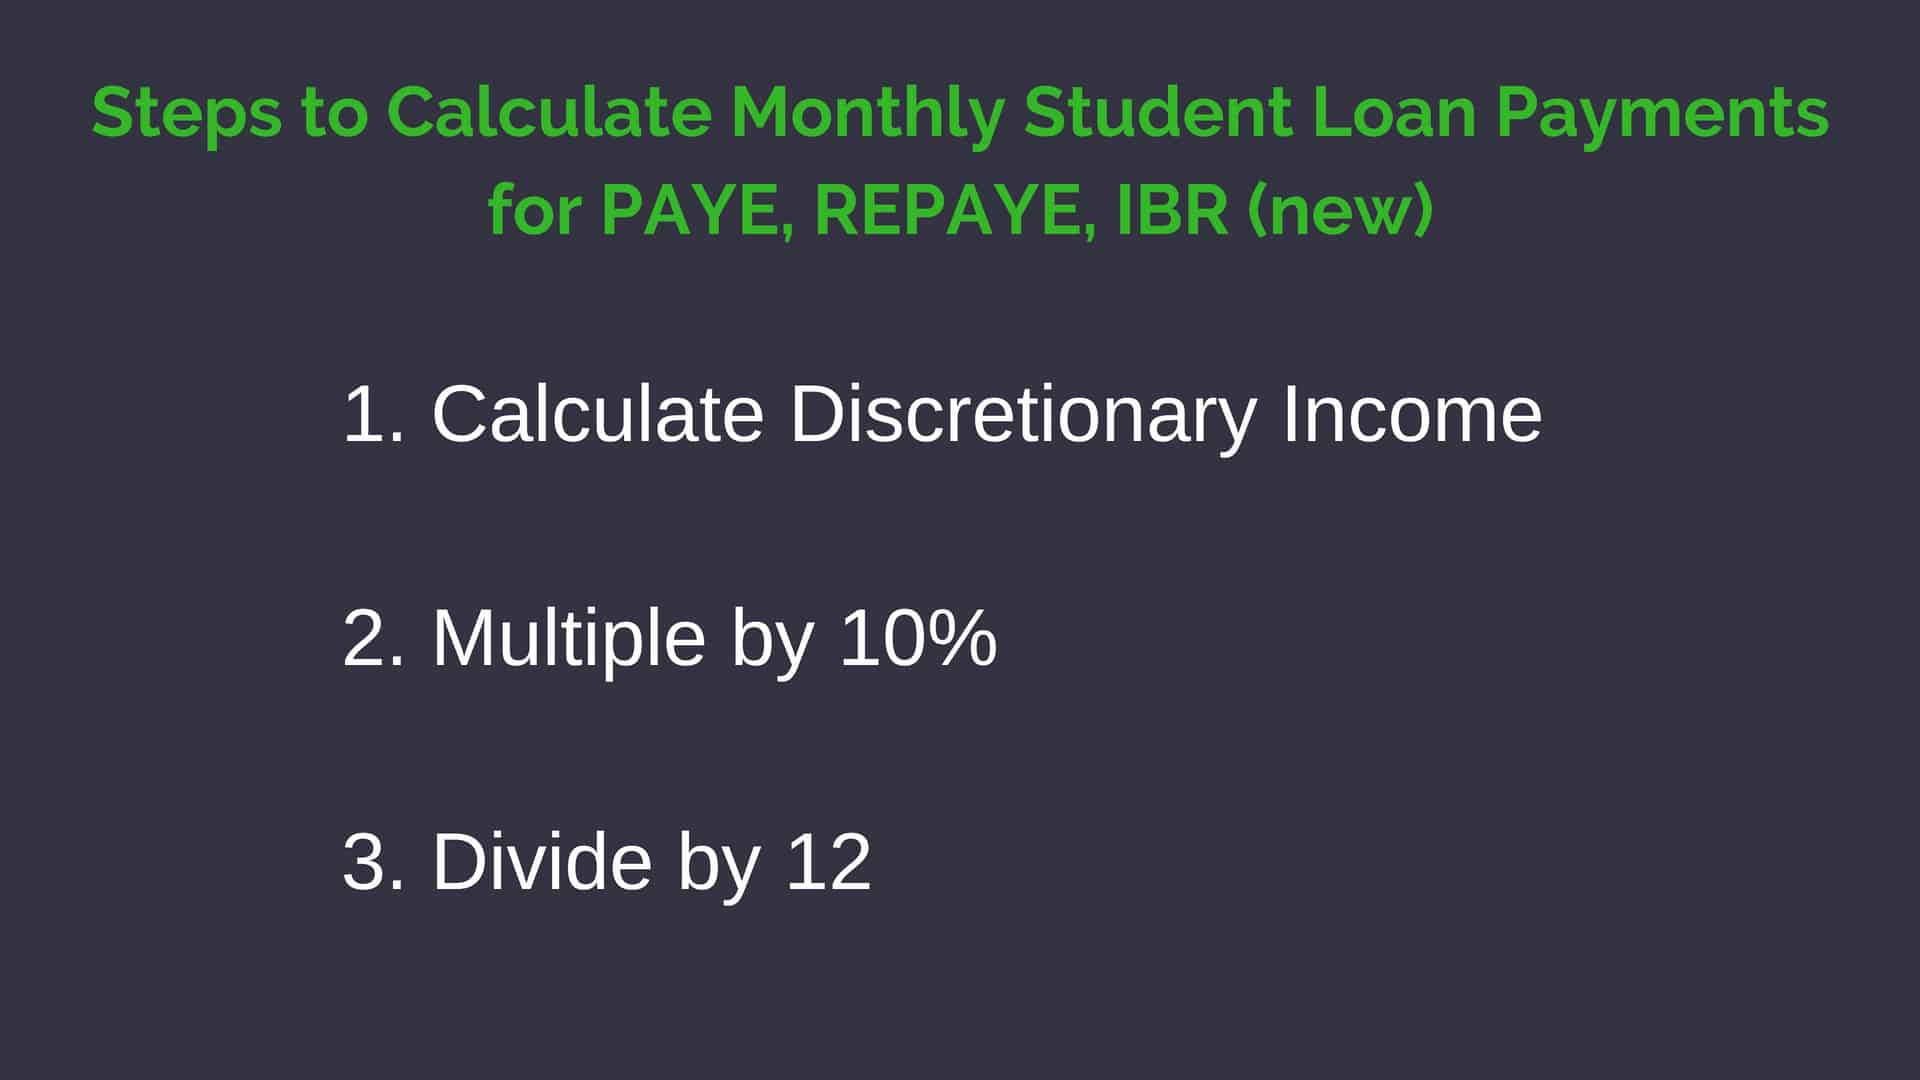 defining and calculating discretionary income for student loans